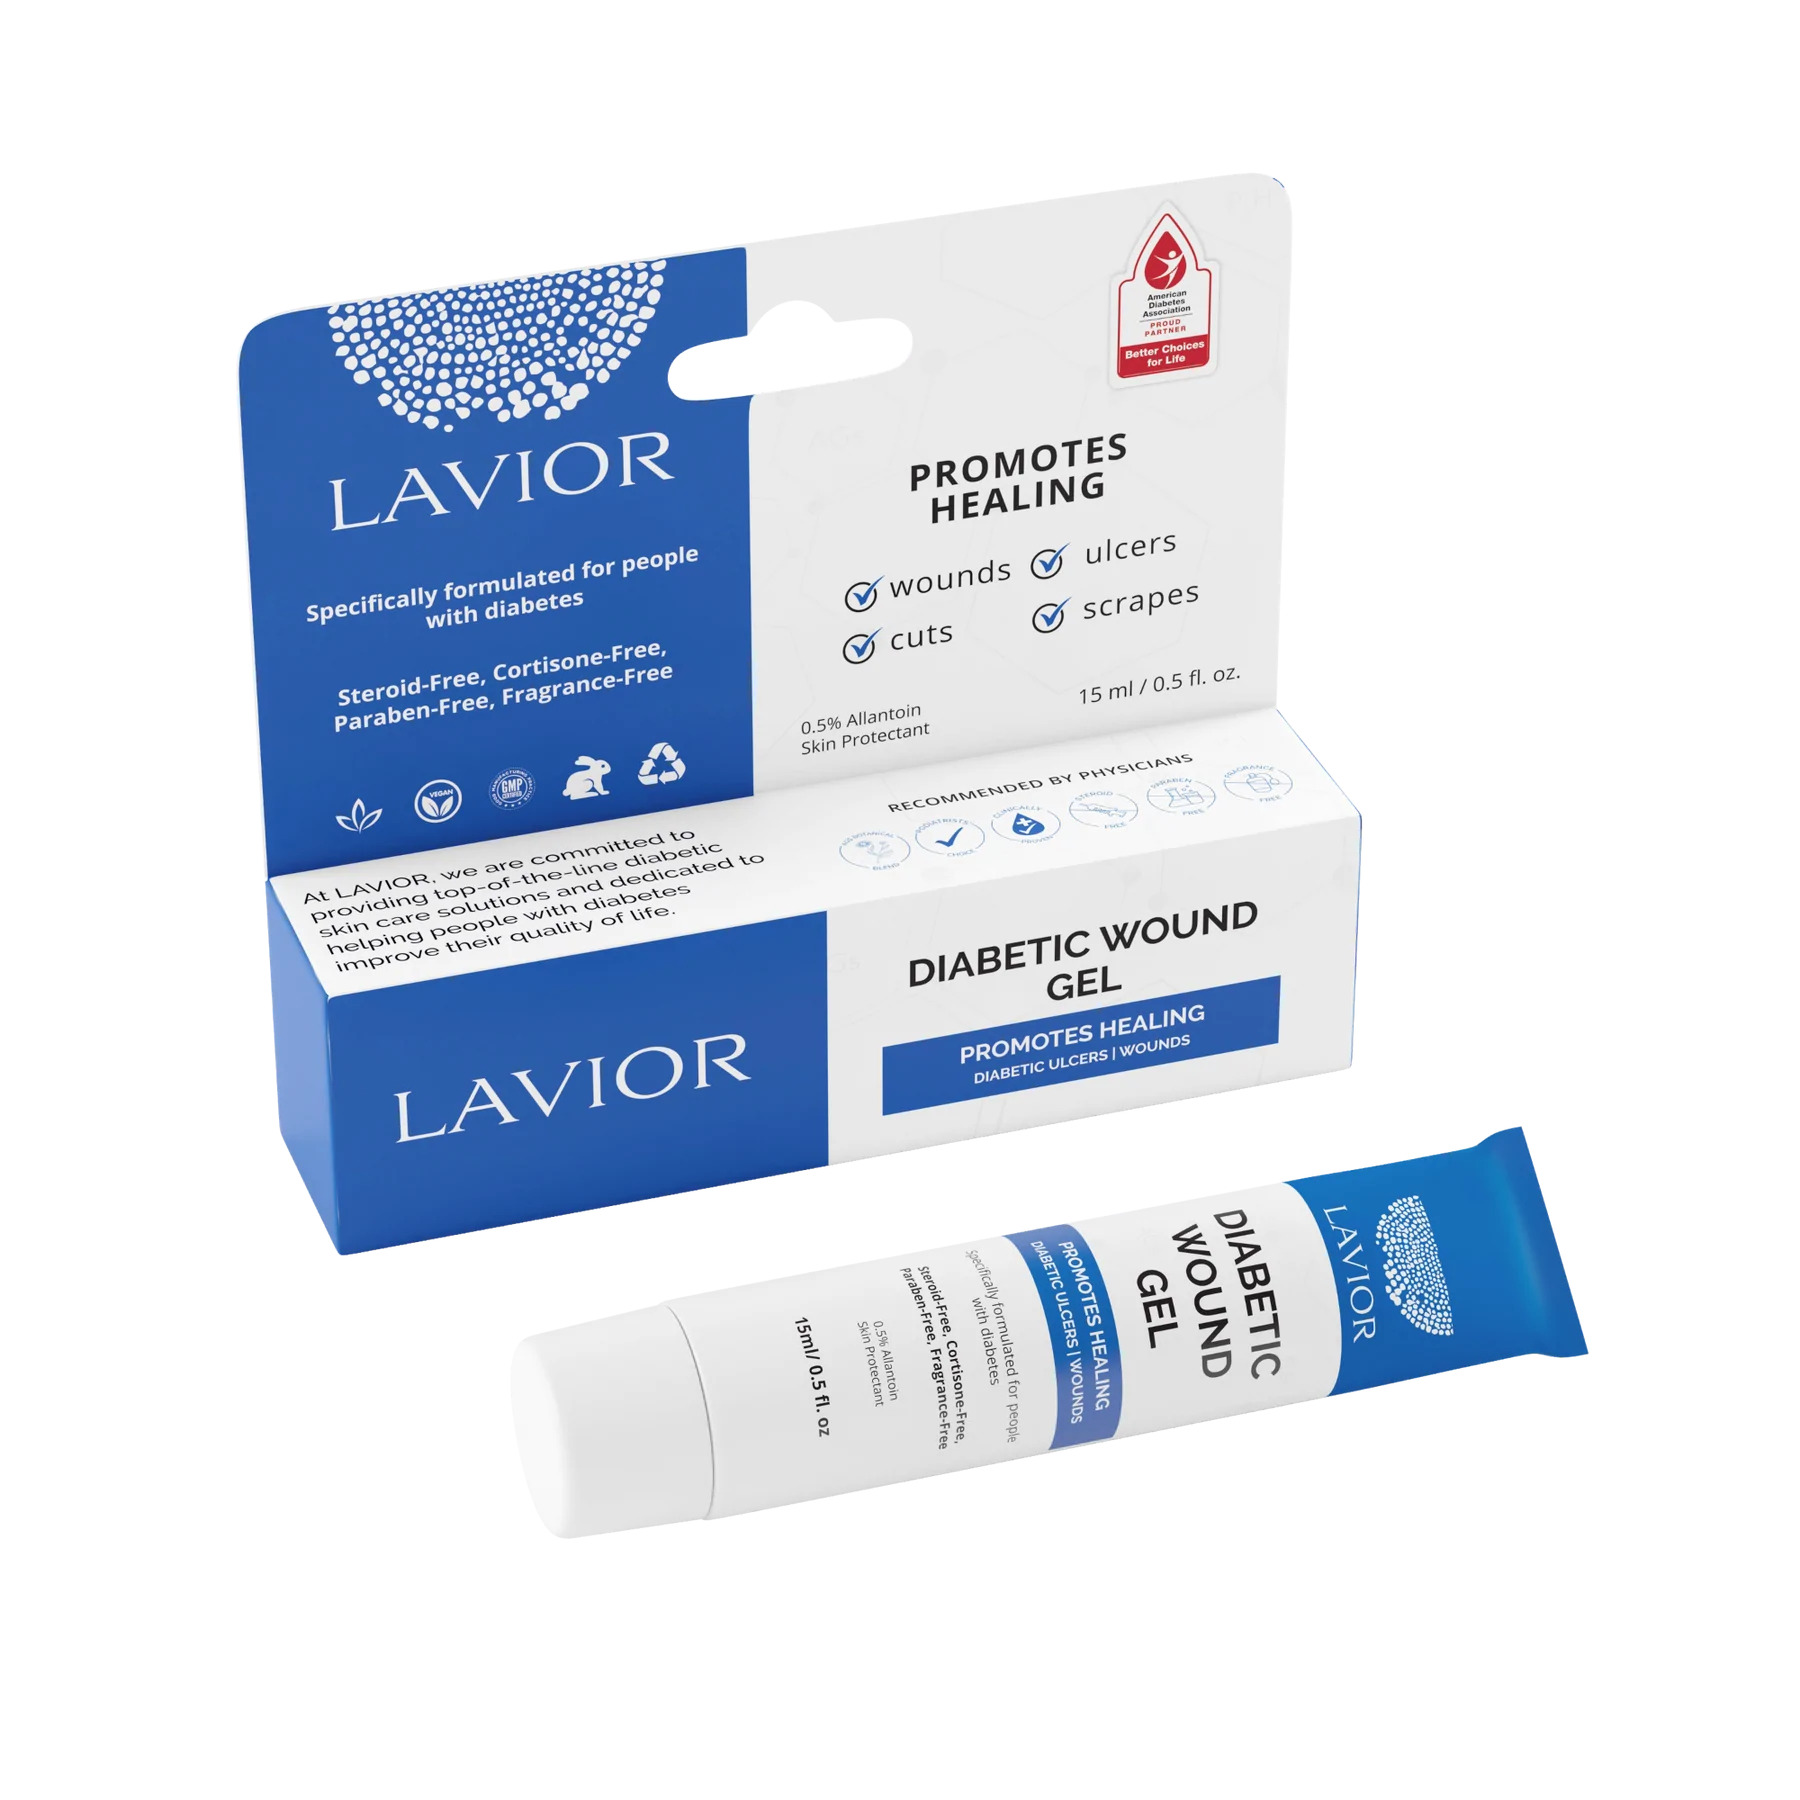 Diabetic Wound Ointment and Gel